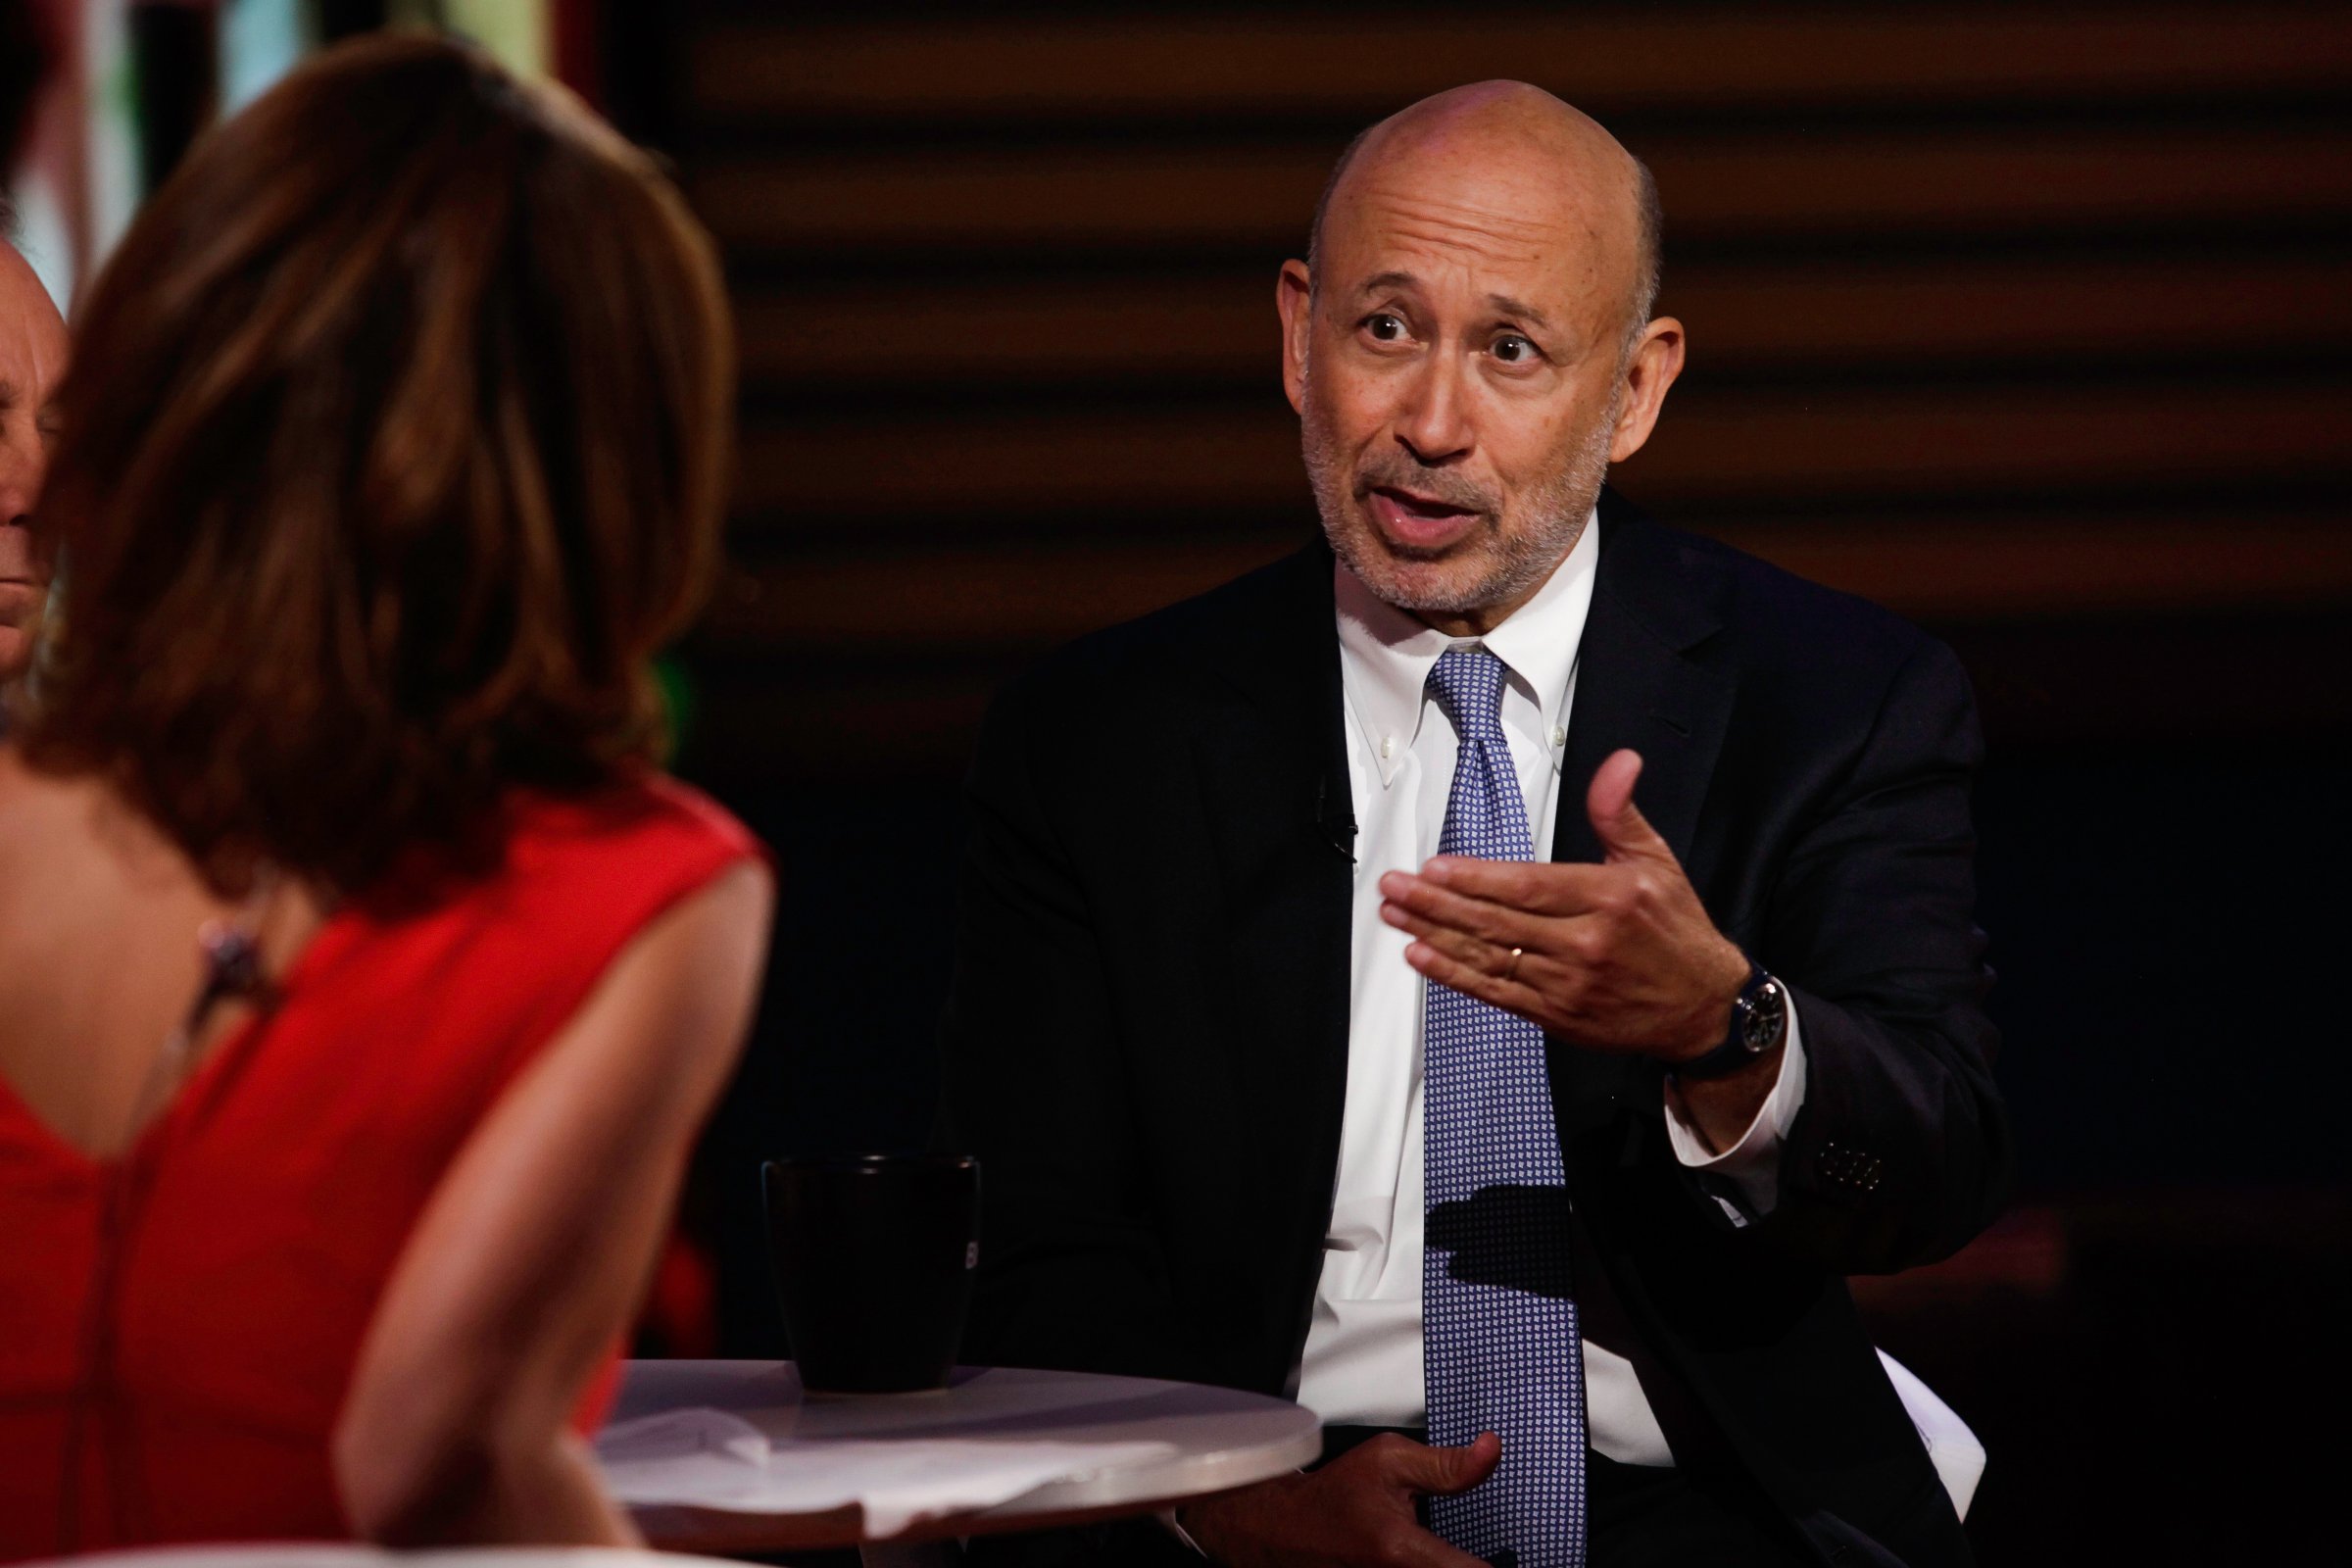 Lloyd Blankfein,  CEO of Goldman Sachs Group, is photographed during a TV interview in the Bloomberg Offices in New York, NY, U.S., on Wednesday,  July 29, 2015